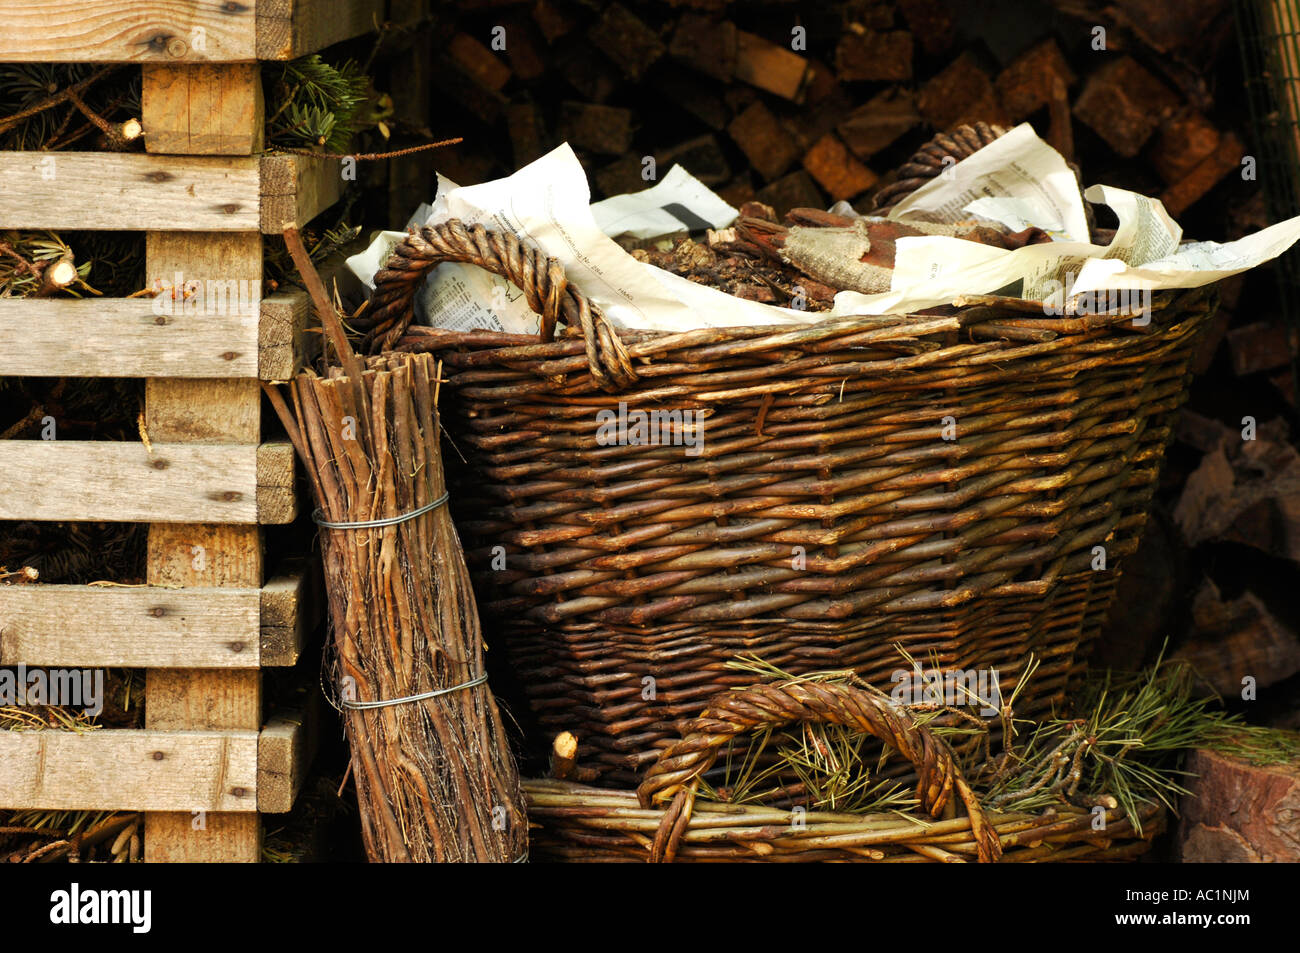 Baskets with firewood and brushwood Stock Photo